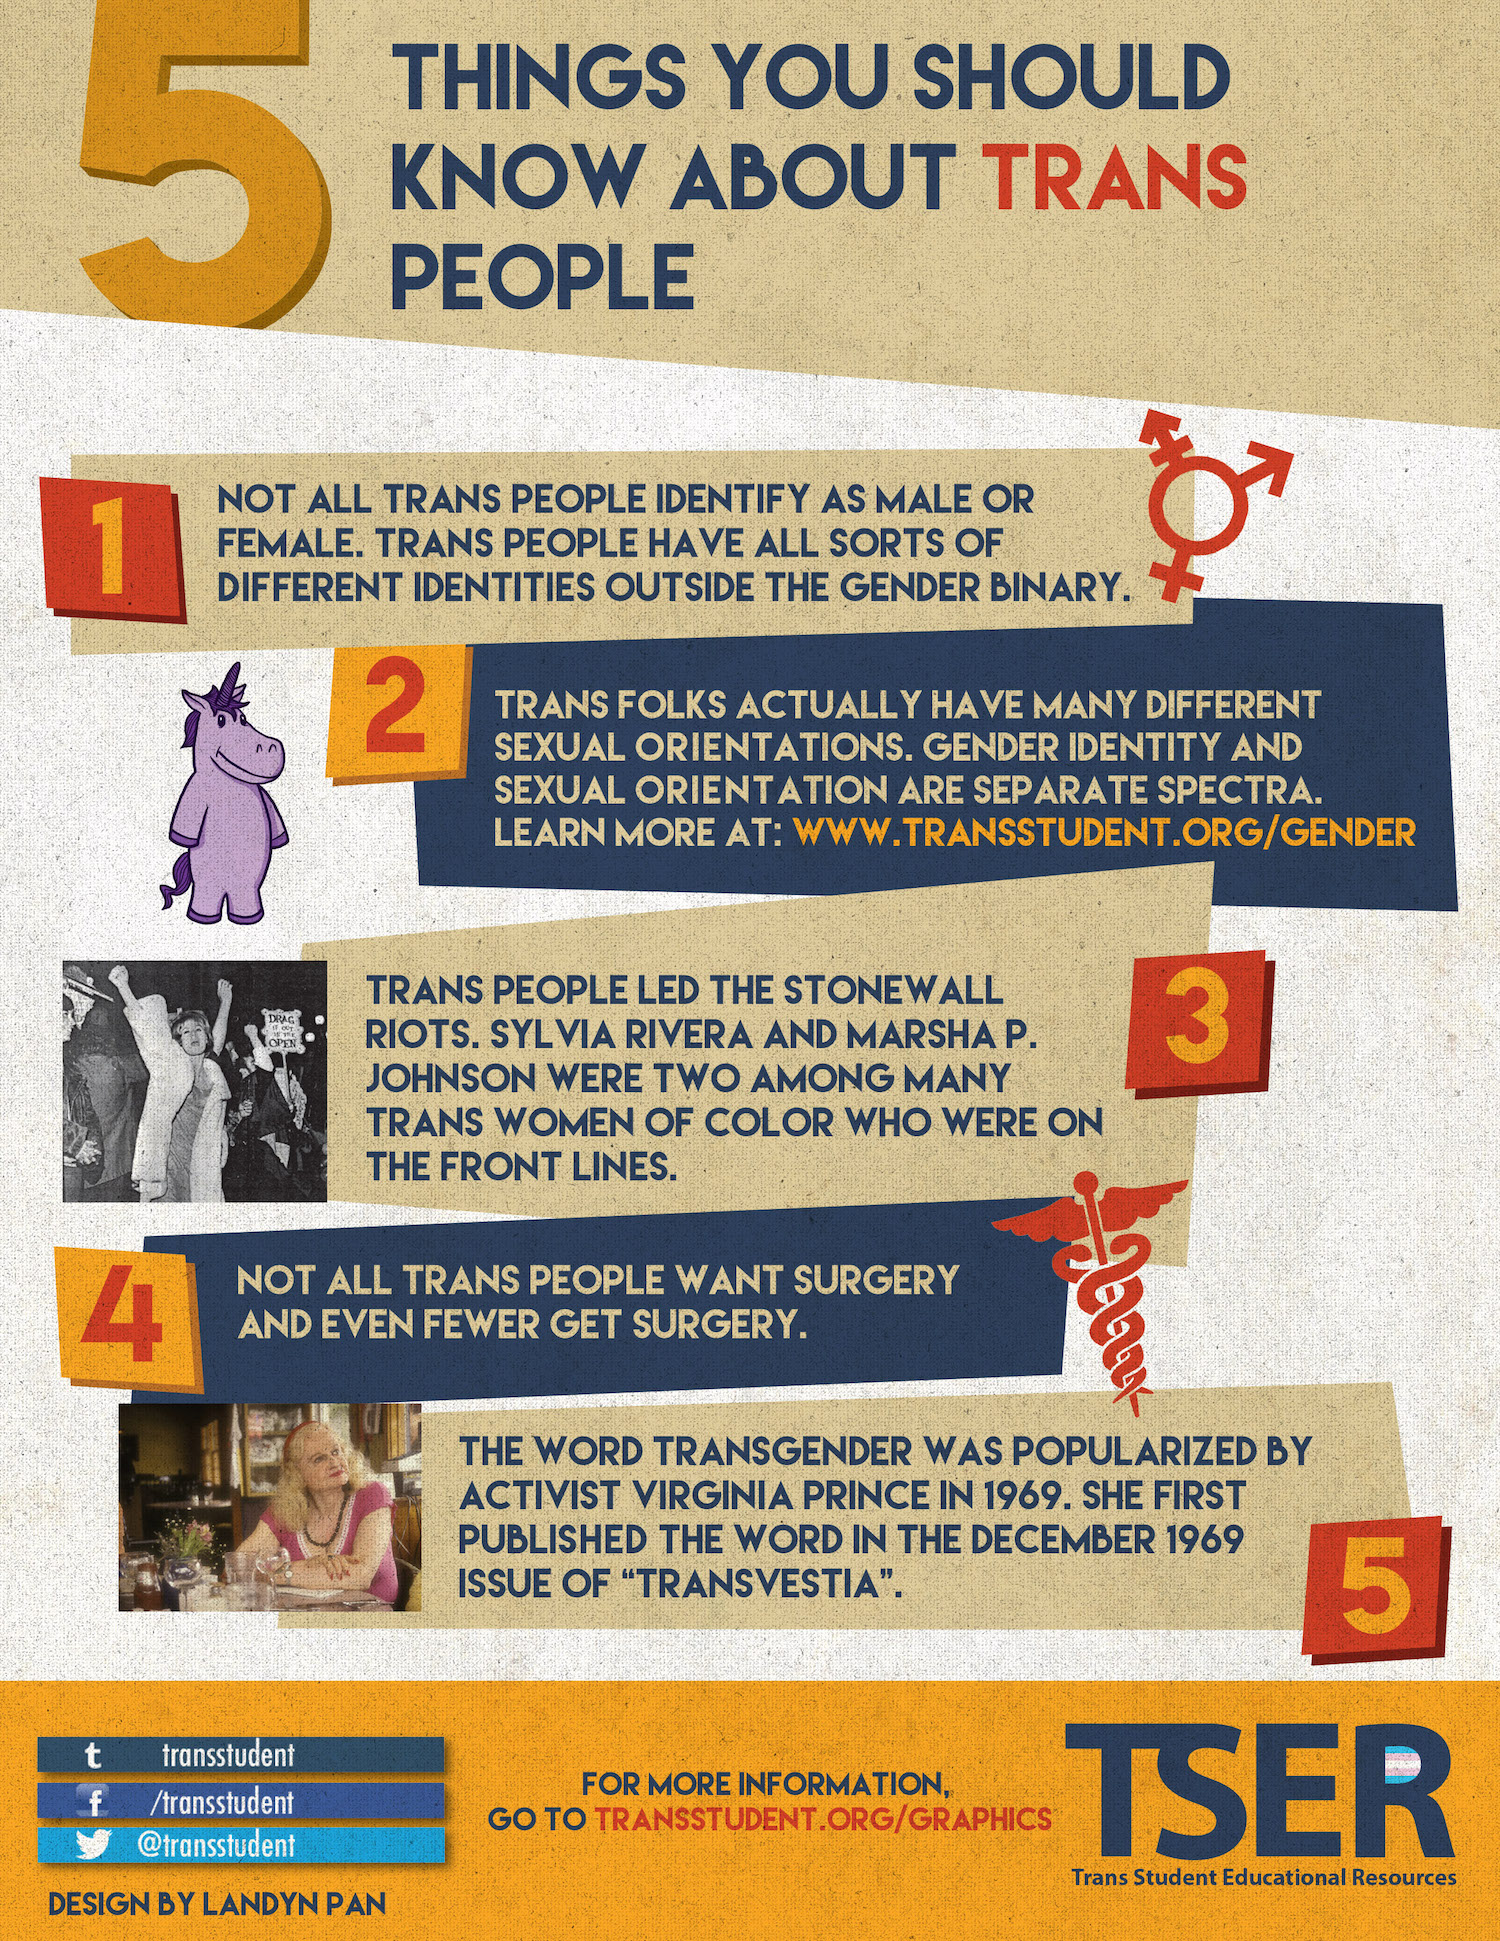 5-Things-You-Should-Know-About-Trans-People.jpg